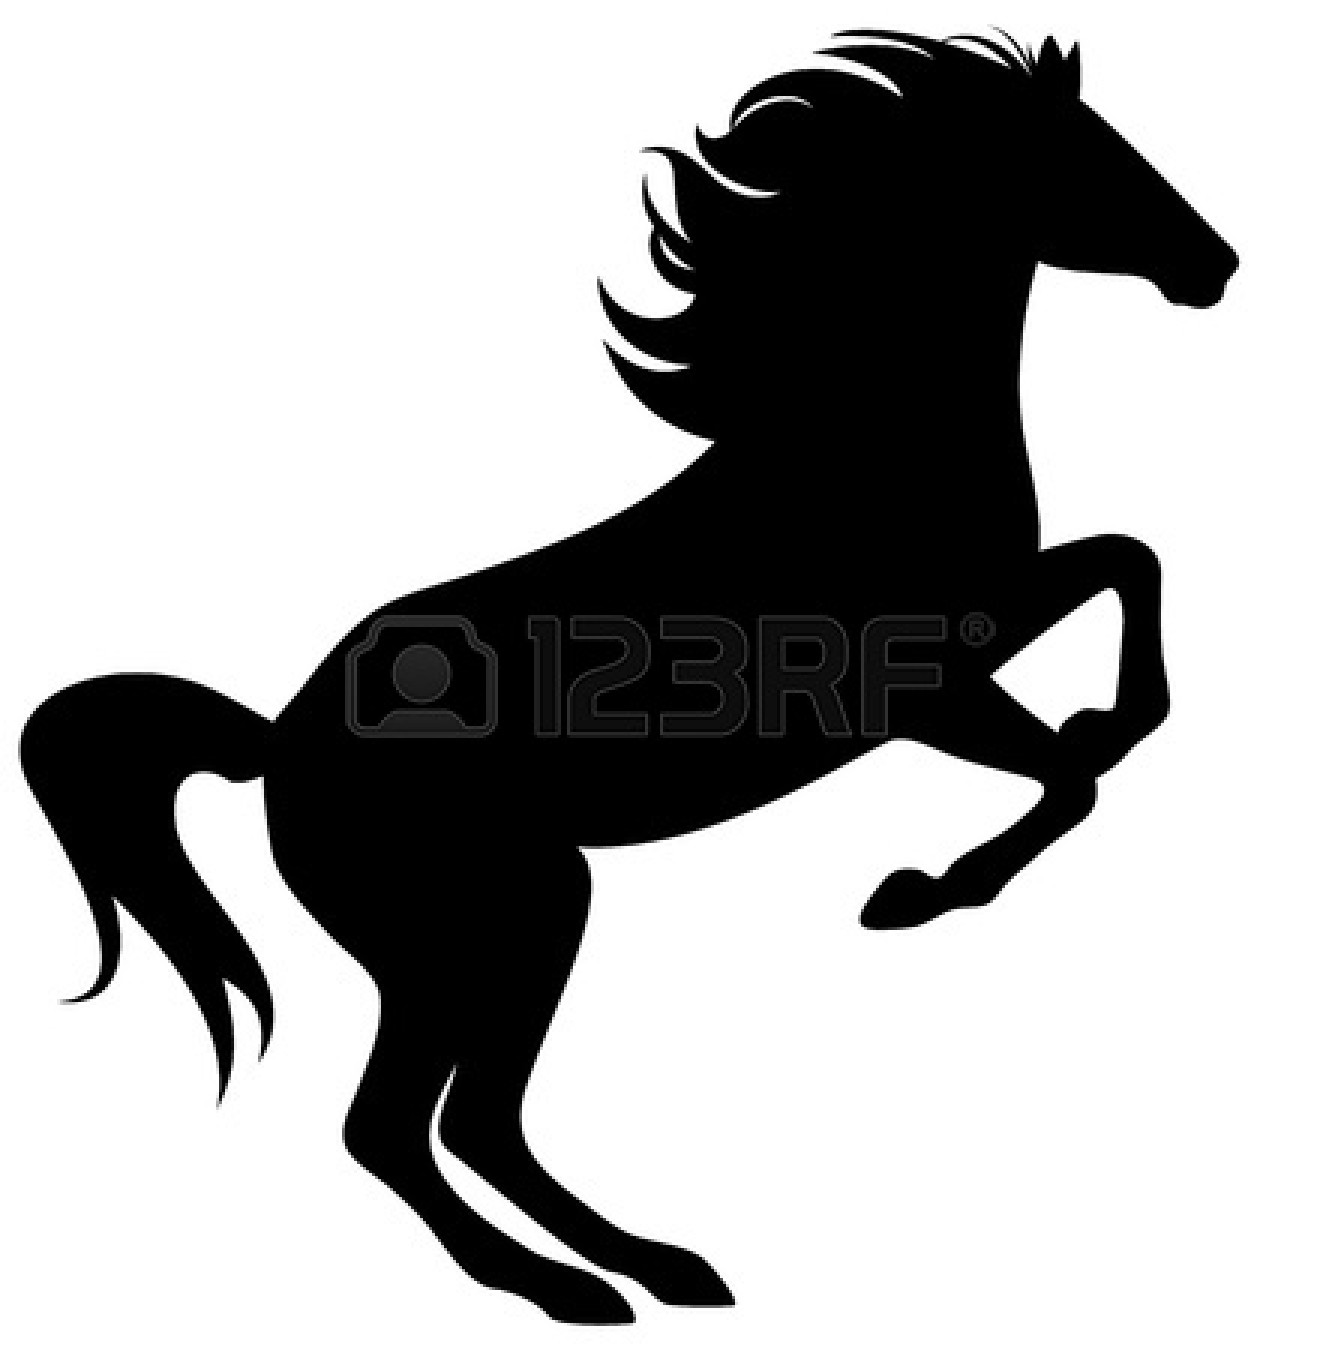 Horse Clipart Black And White   Clipart Panda   Free Clipart Images